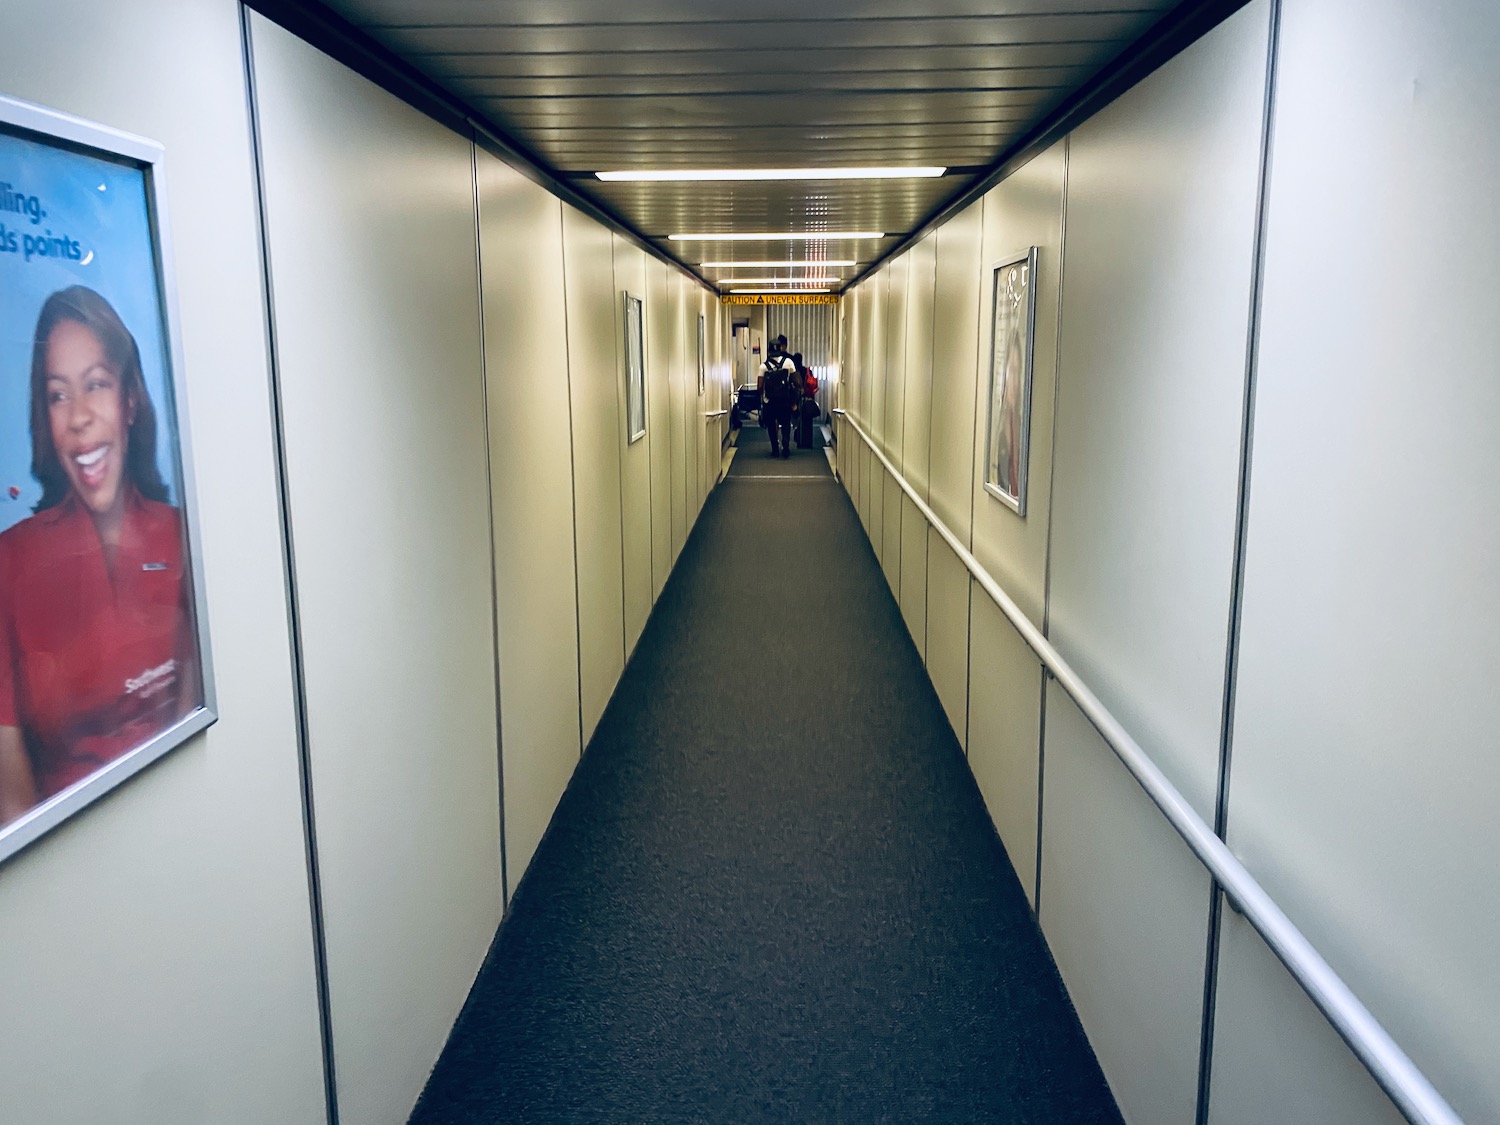 a long hallway with people walking on it